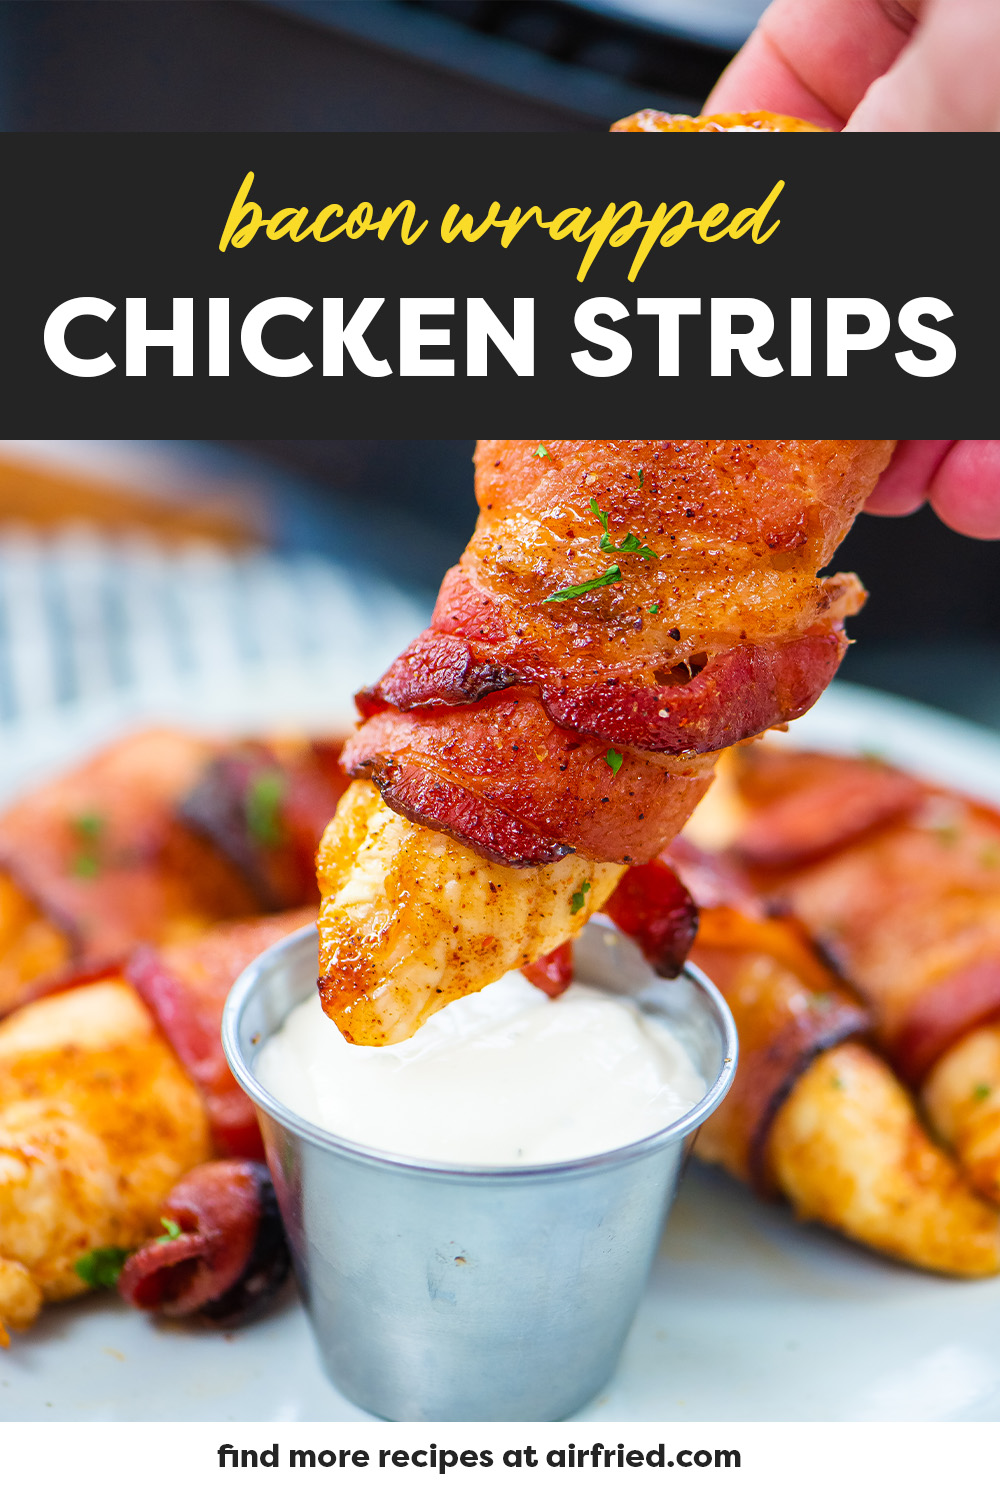 A bacon wrapped chicken strip being dipped into ranch dressing.